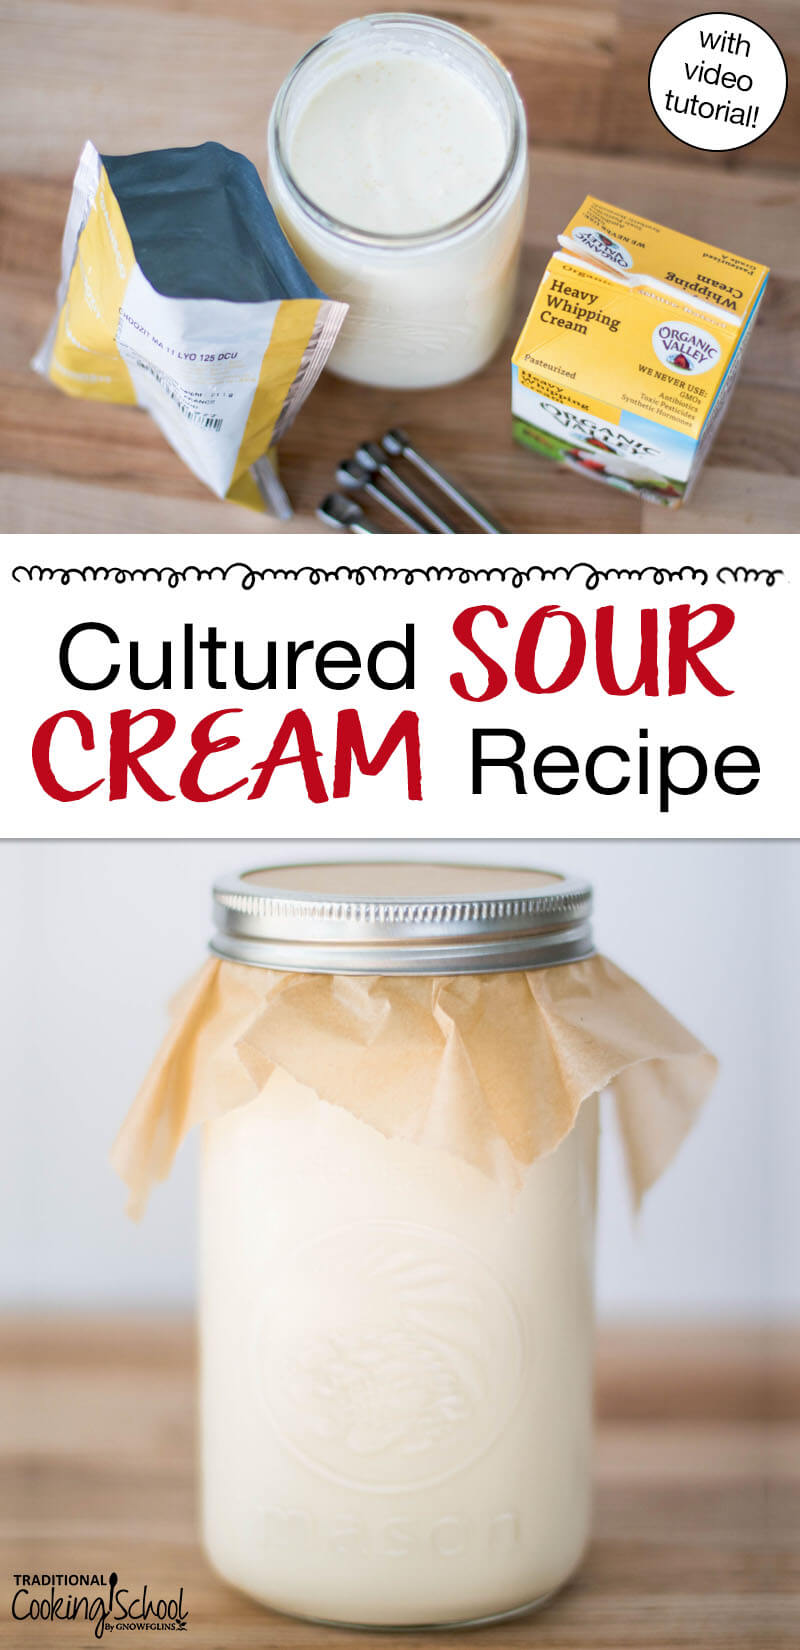 Photo collage of ingredients needed for making sour cream, and a jar of cream covered with parchment paper and a metal band. Text overlay says: "Cultured Sour Cream Recipe (with video tutorial)"